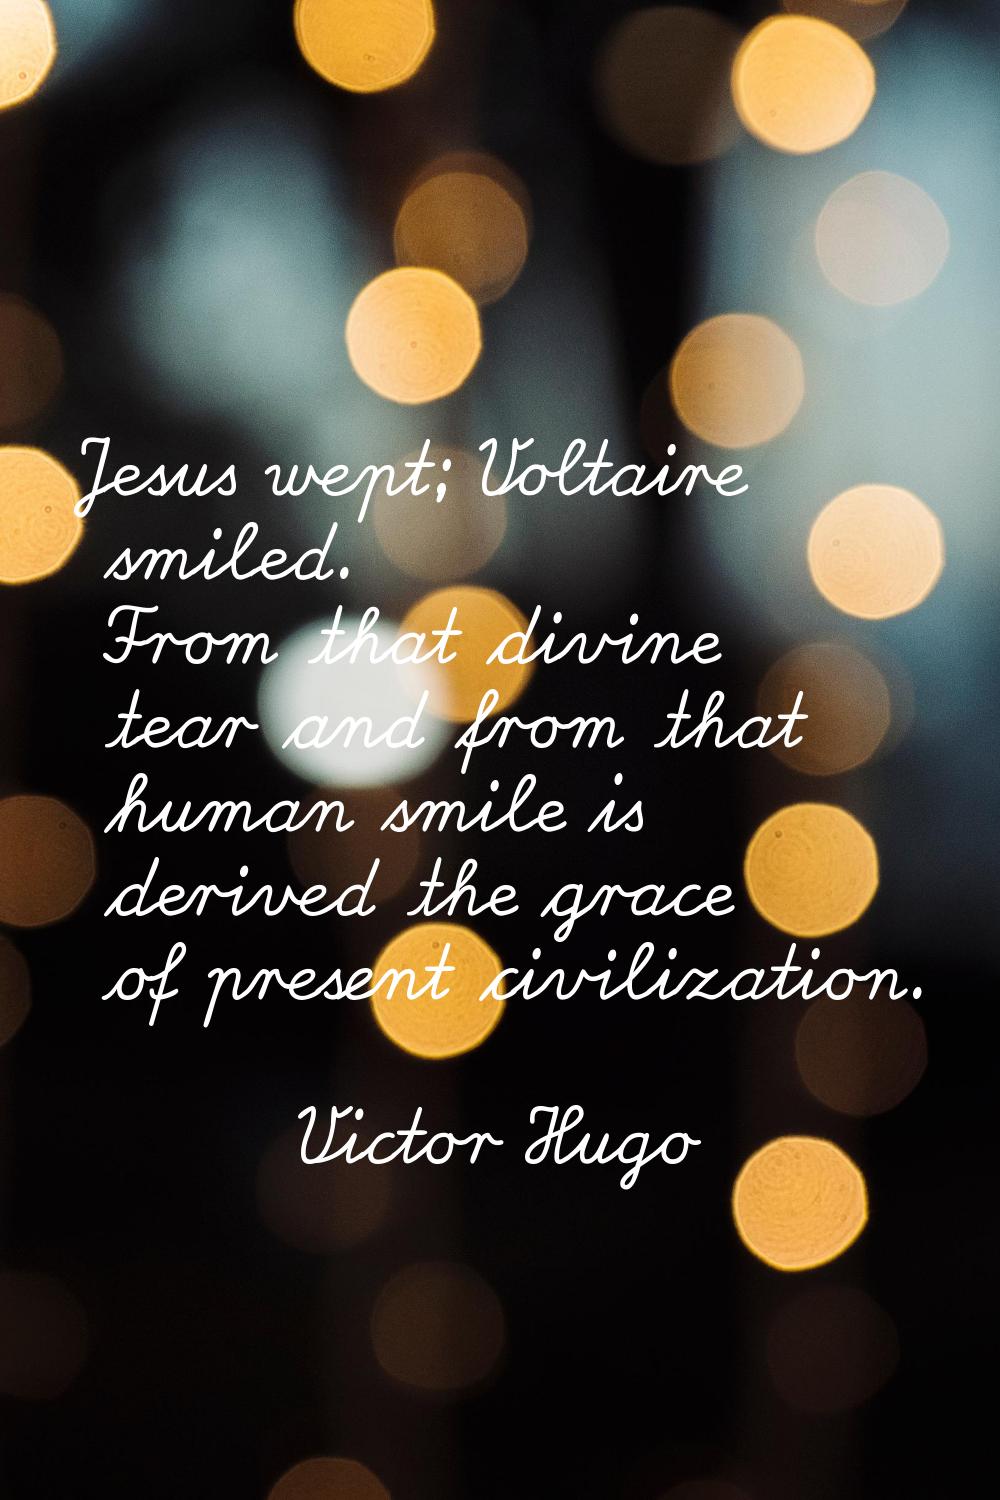 Jesus wept; Voltaire smiled. From that divine tear and from that human smile is derived the grace o